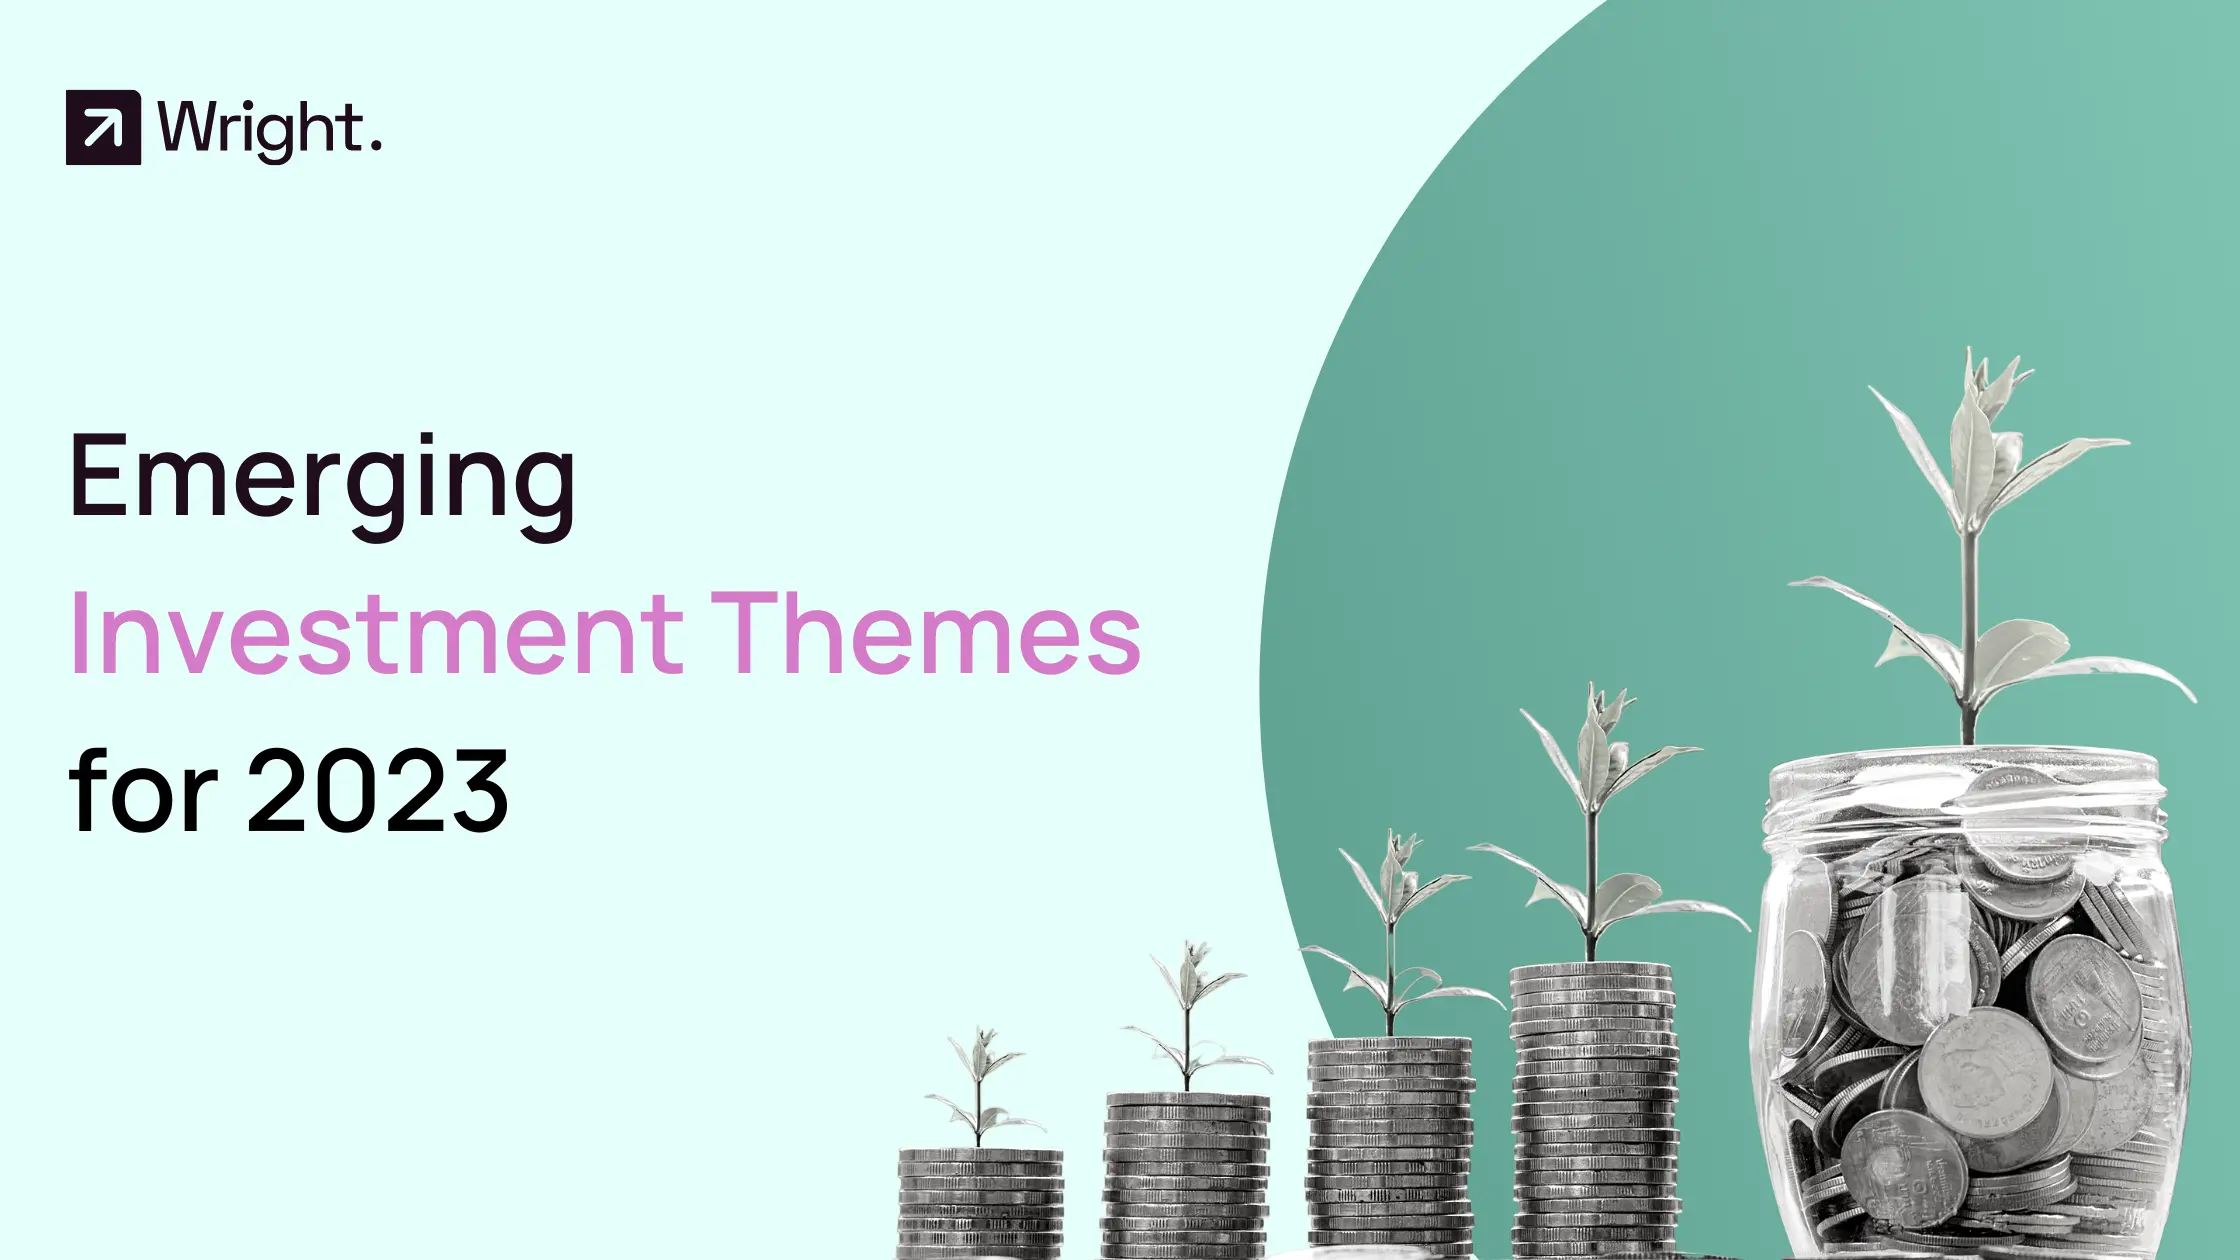 Emerging Investment Themes for 2023